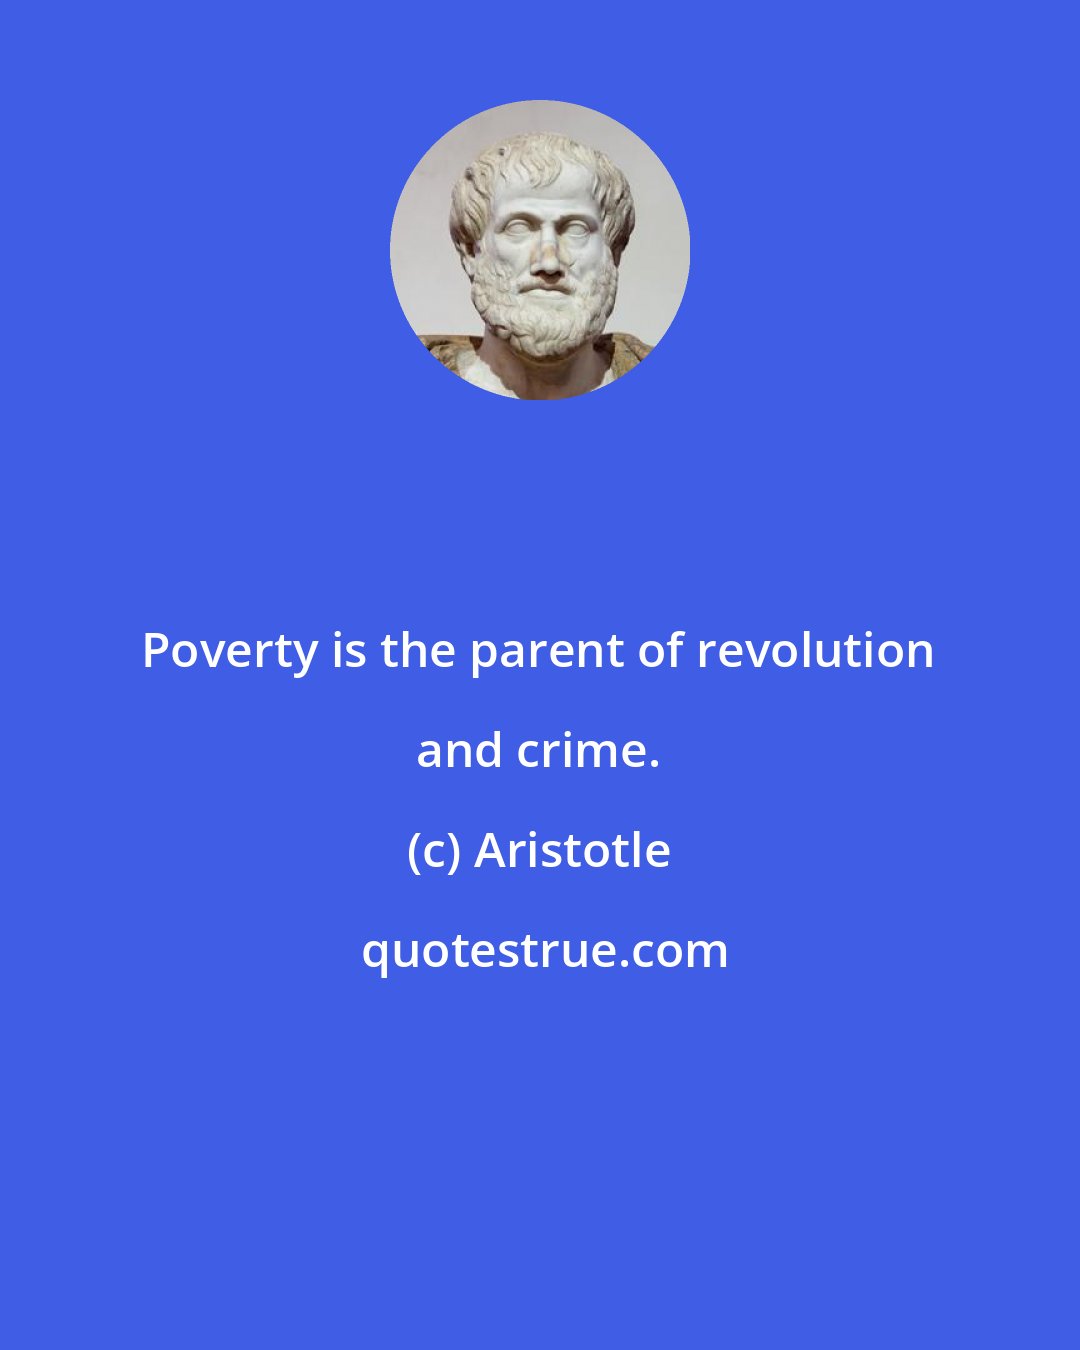 Aristotle: Poverty is the parent of revolution and crime.